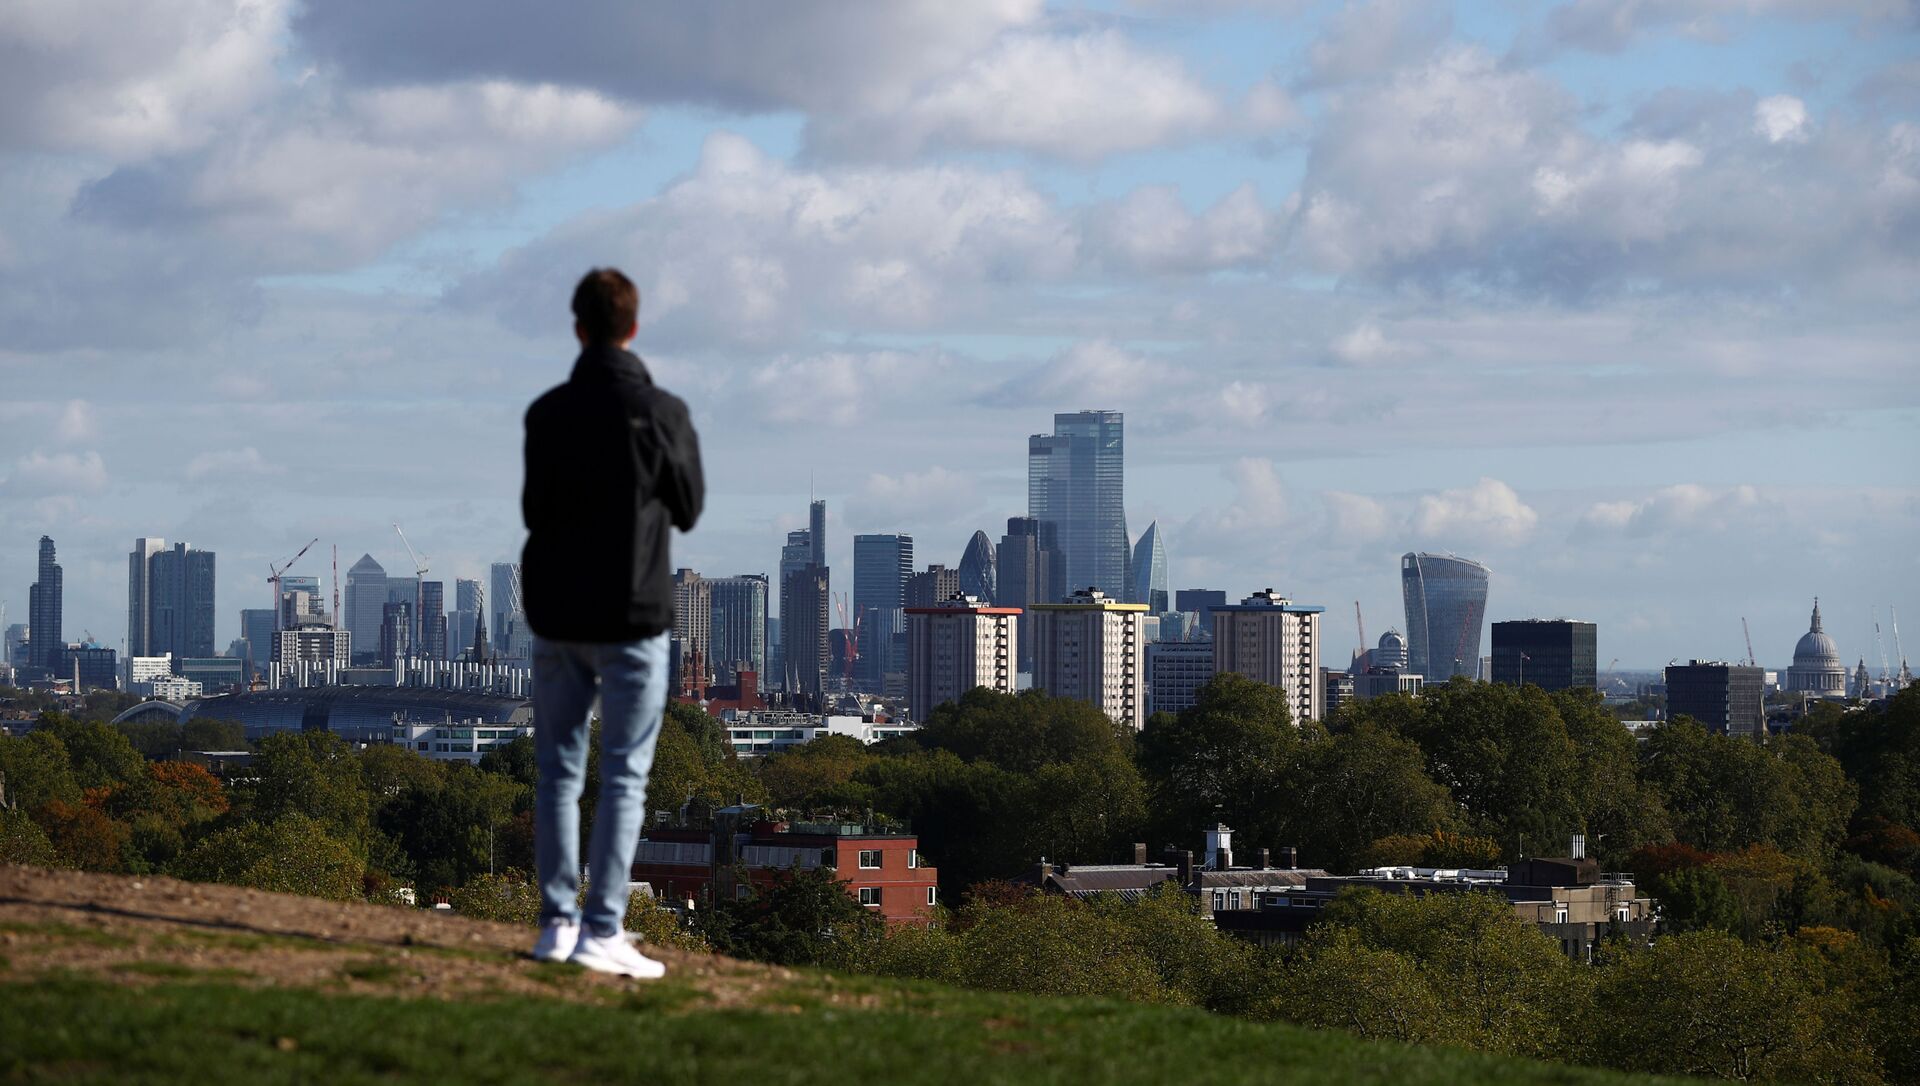 FILE PHOTO: A person looks at the skyline of central London in the background, amid the outbreak of the coronavirus disease (COVID-19), in London, Britain October 15, 2020. REUTERS/Hannah McKay/File Photo - Sputnik International, 1920, 23.02.2021